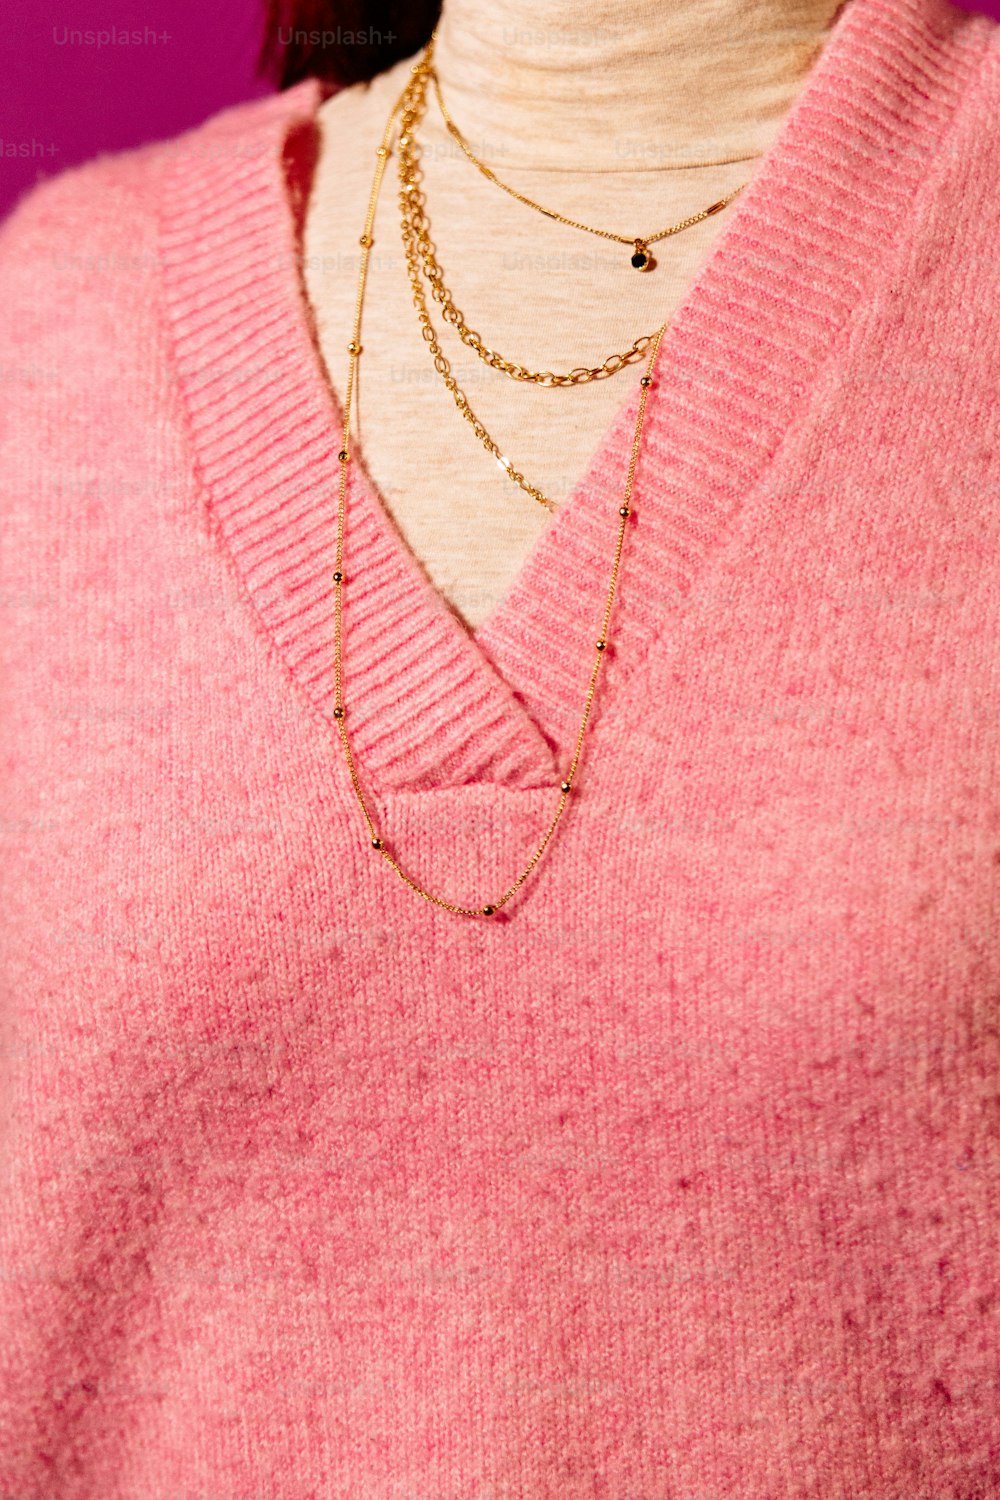 a close up of a person wearing a pink sweater